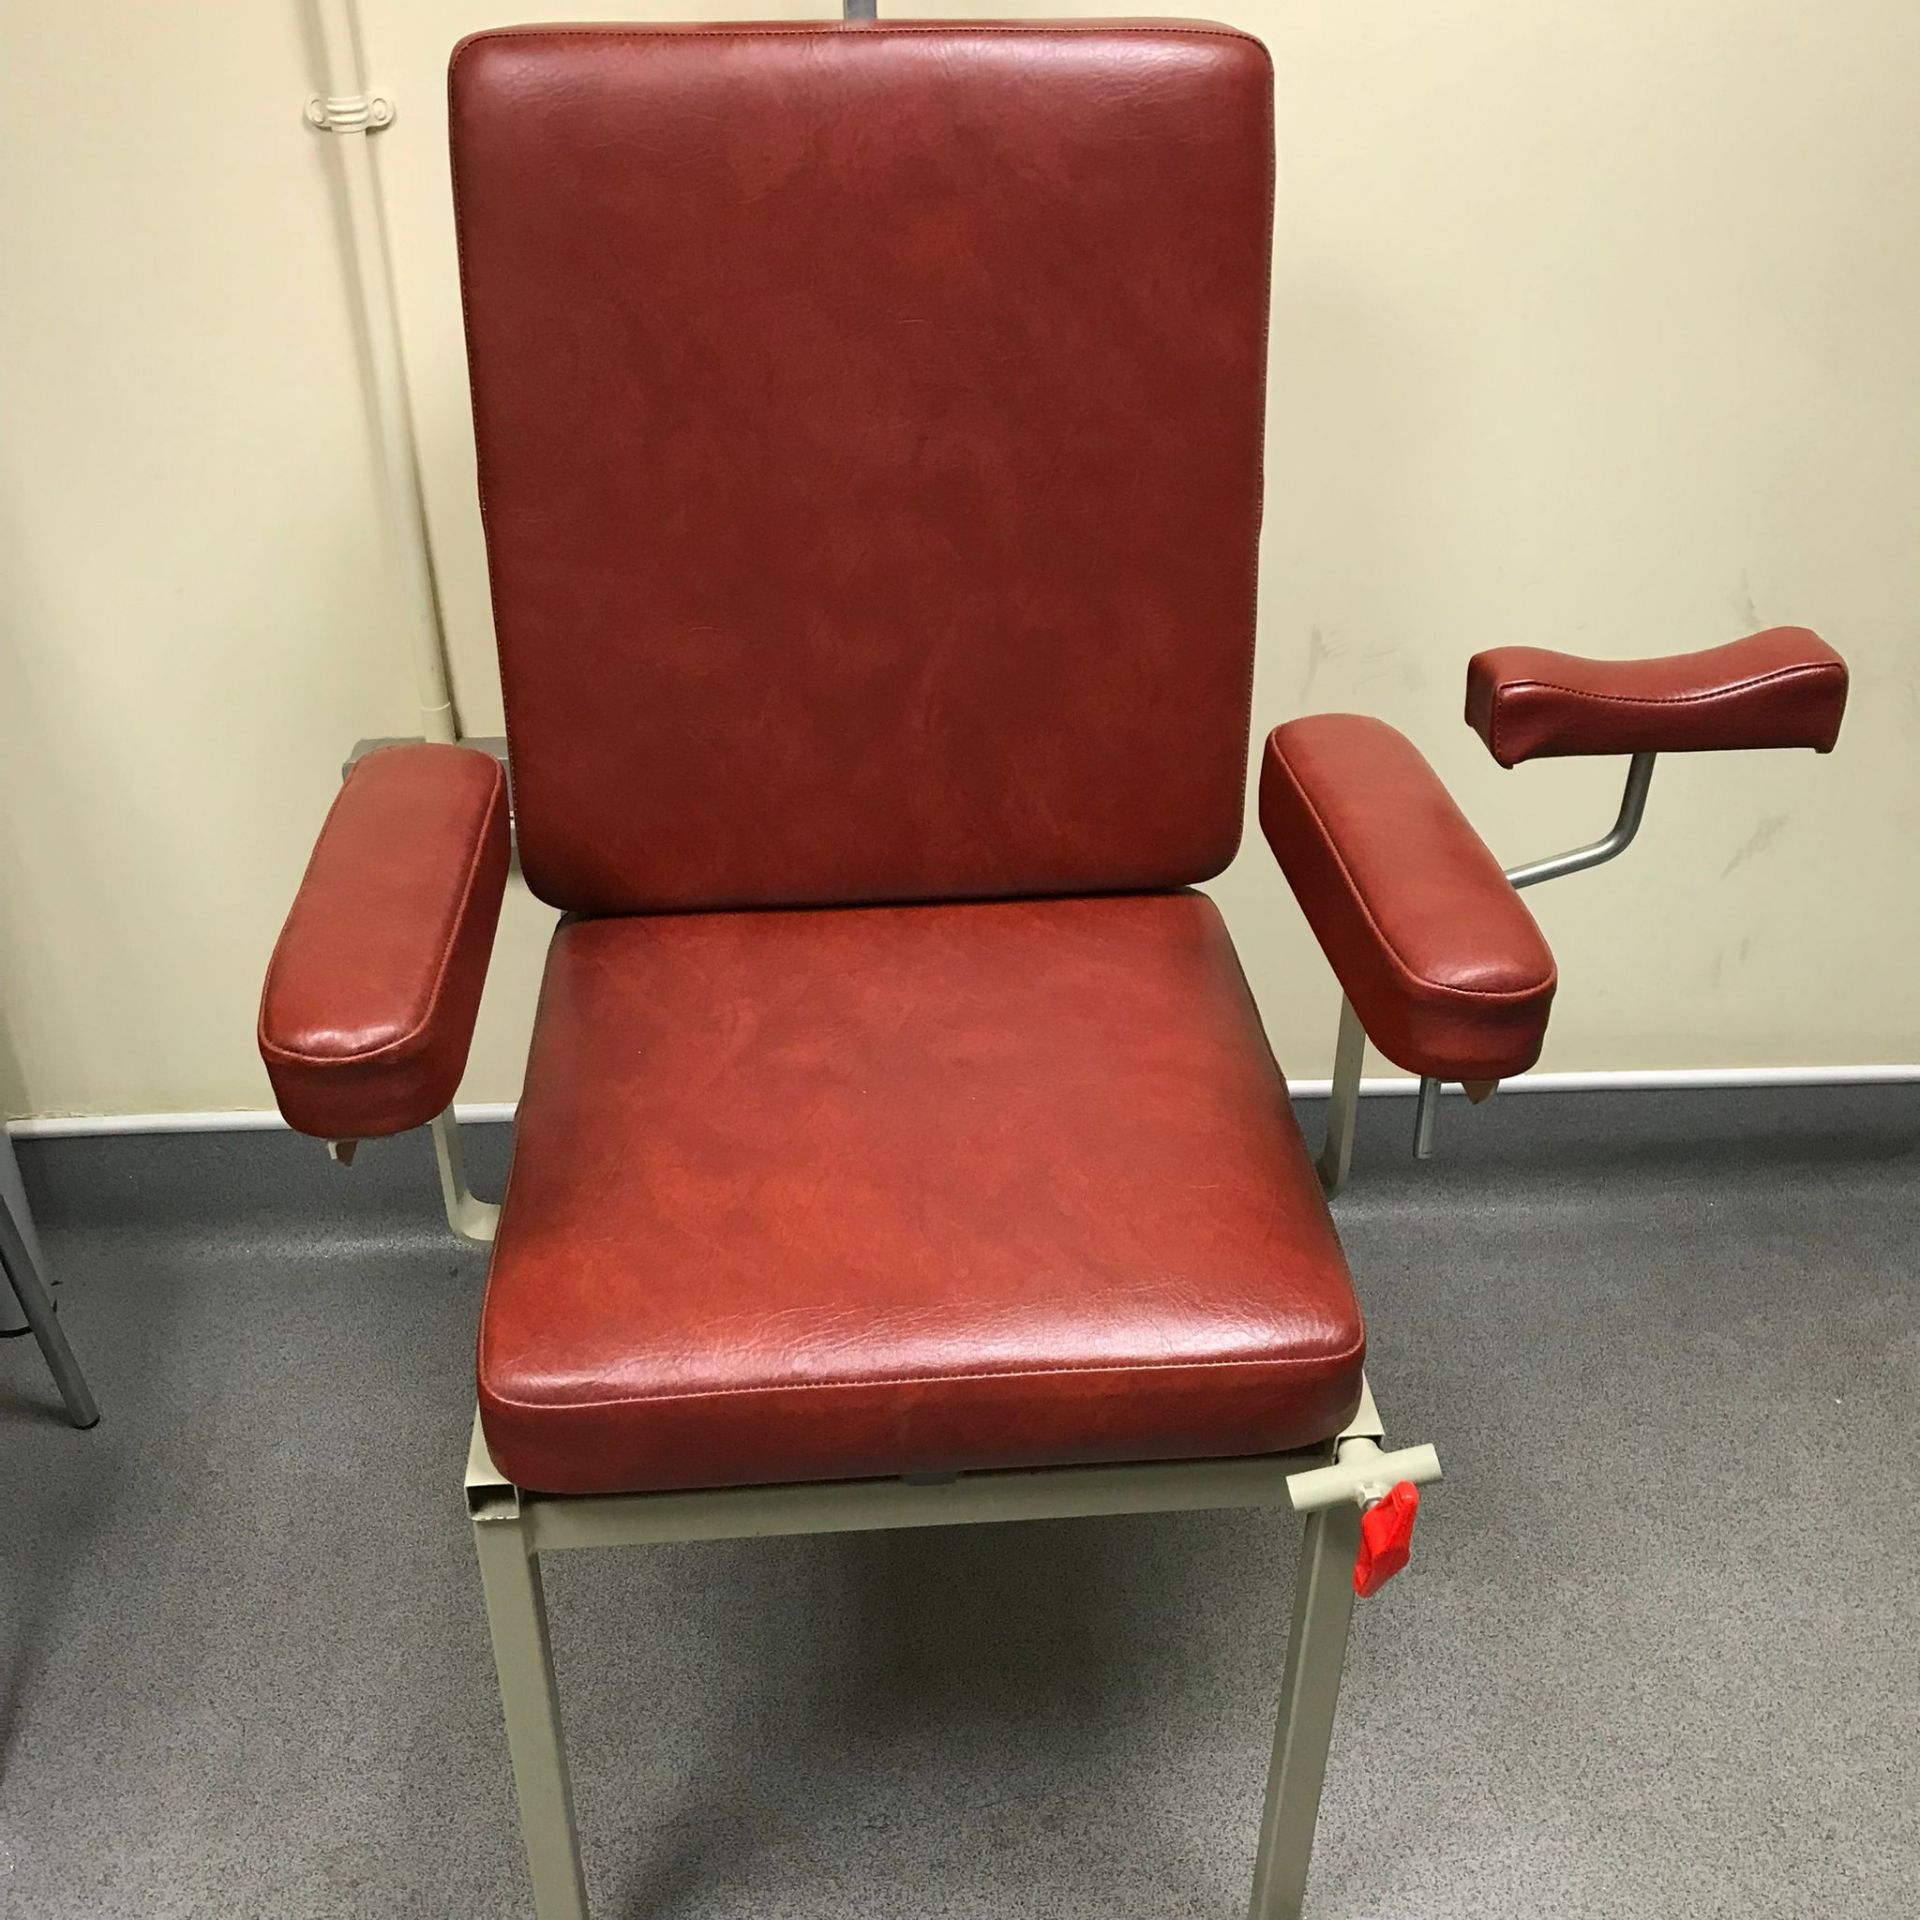 Red Leather Medical Chair - Image 3 of 3